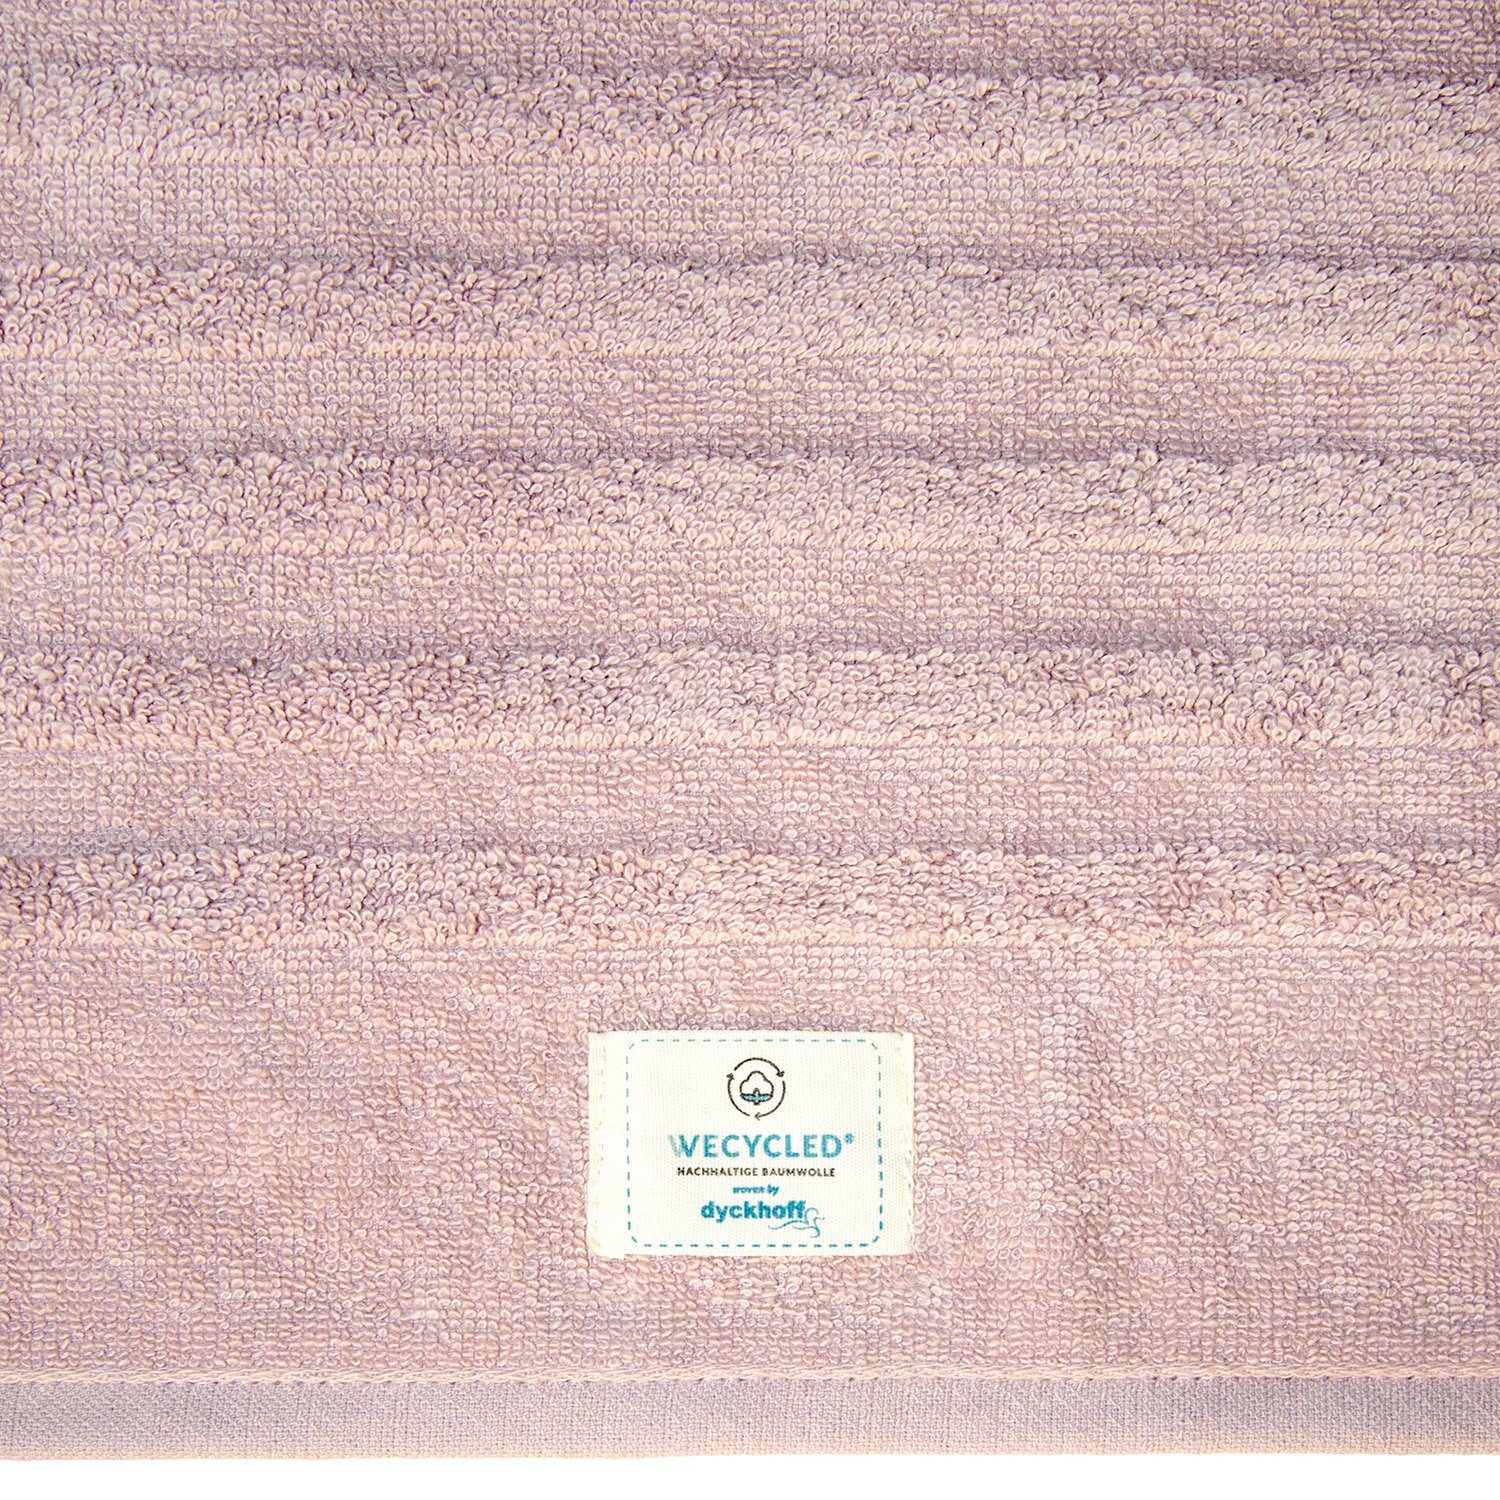 Dyckhoff Handtuch Dyckhoff Frottierserie (1-St) 'Wecycled', Mauve